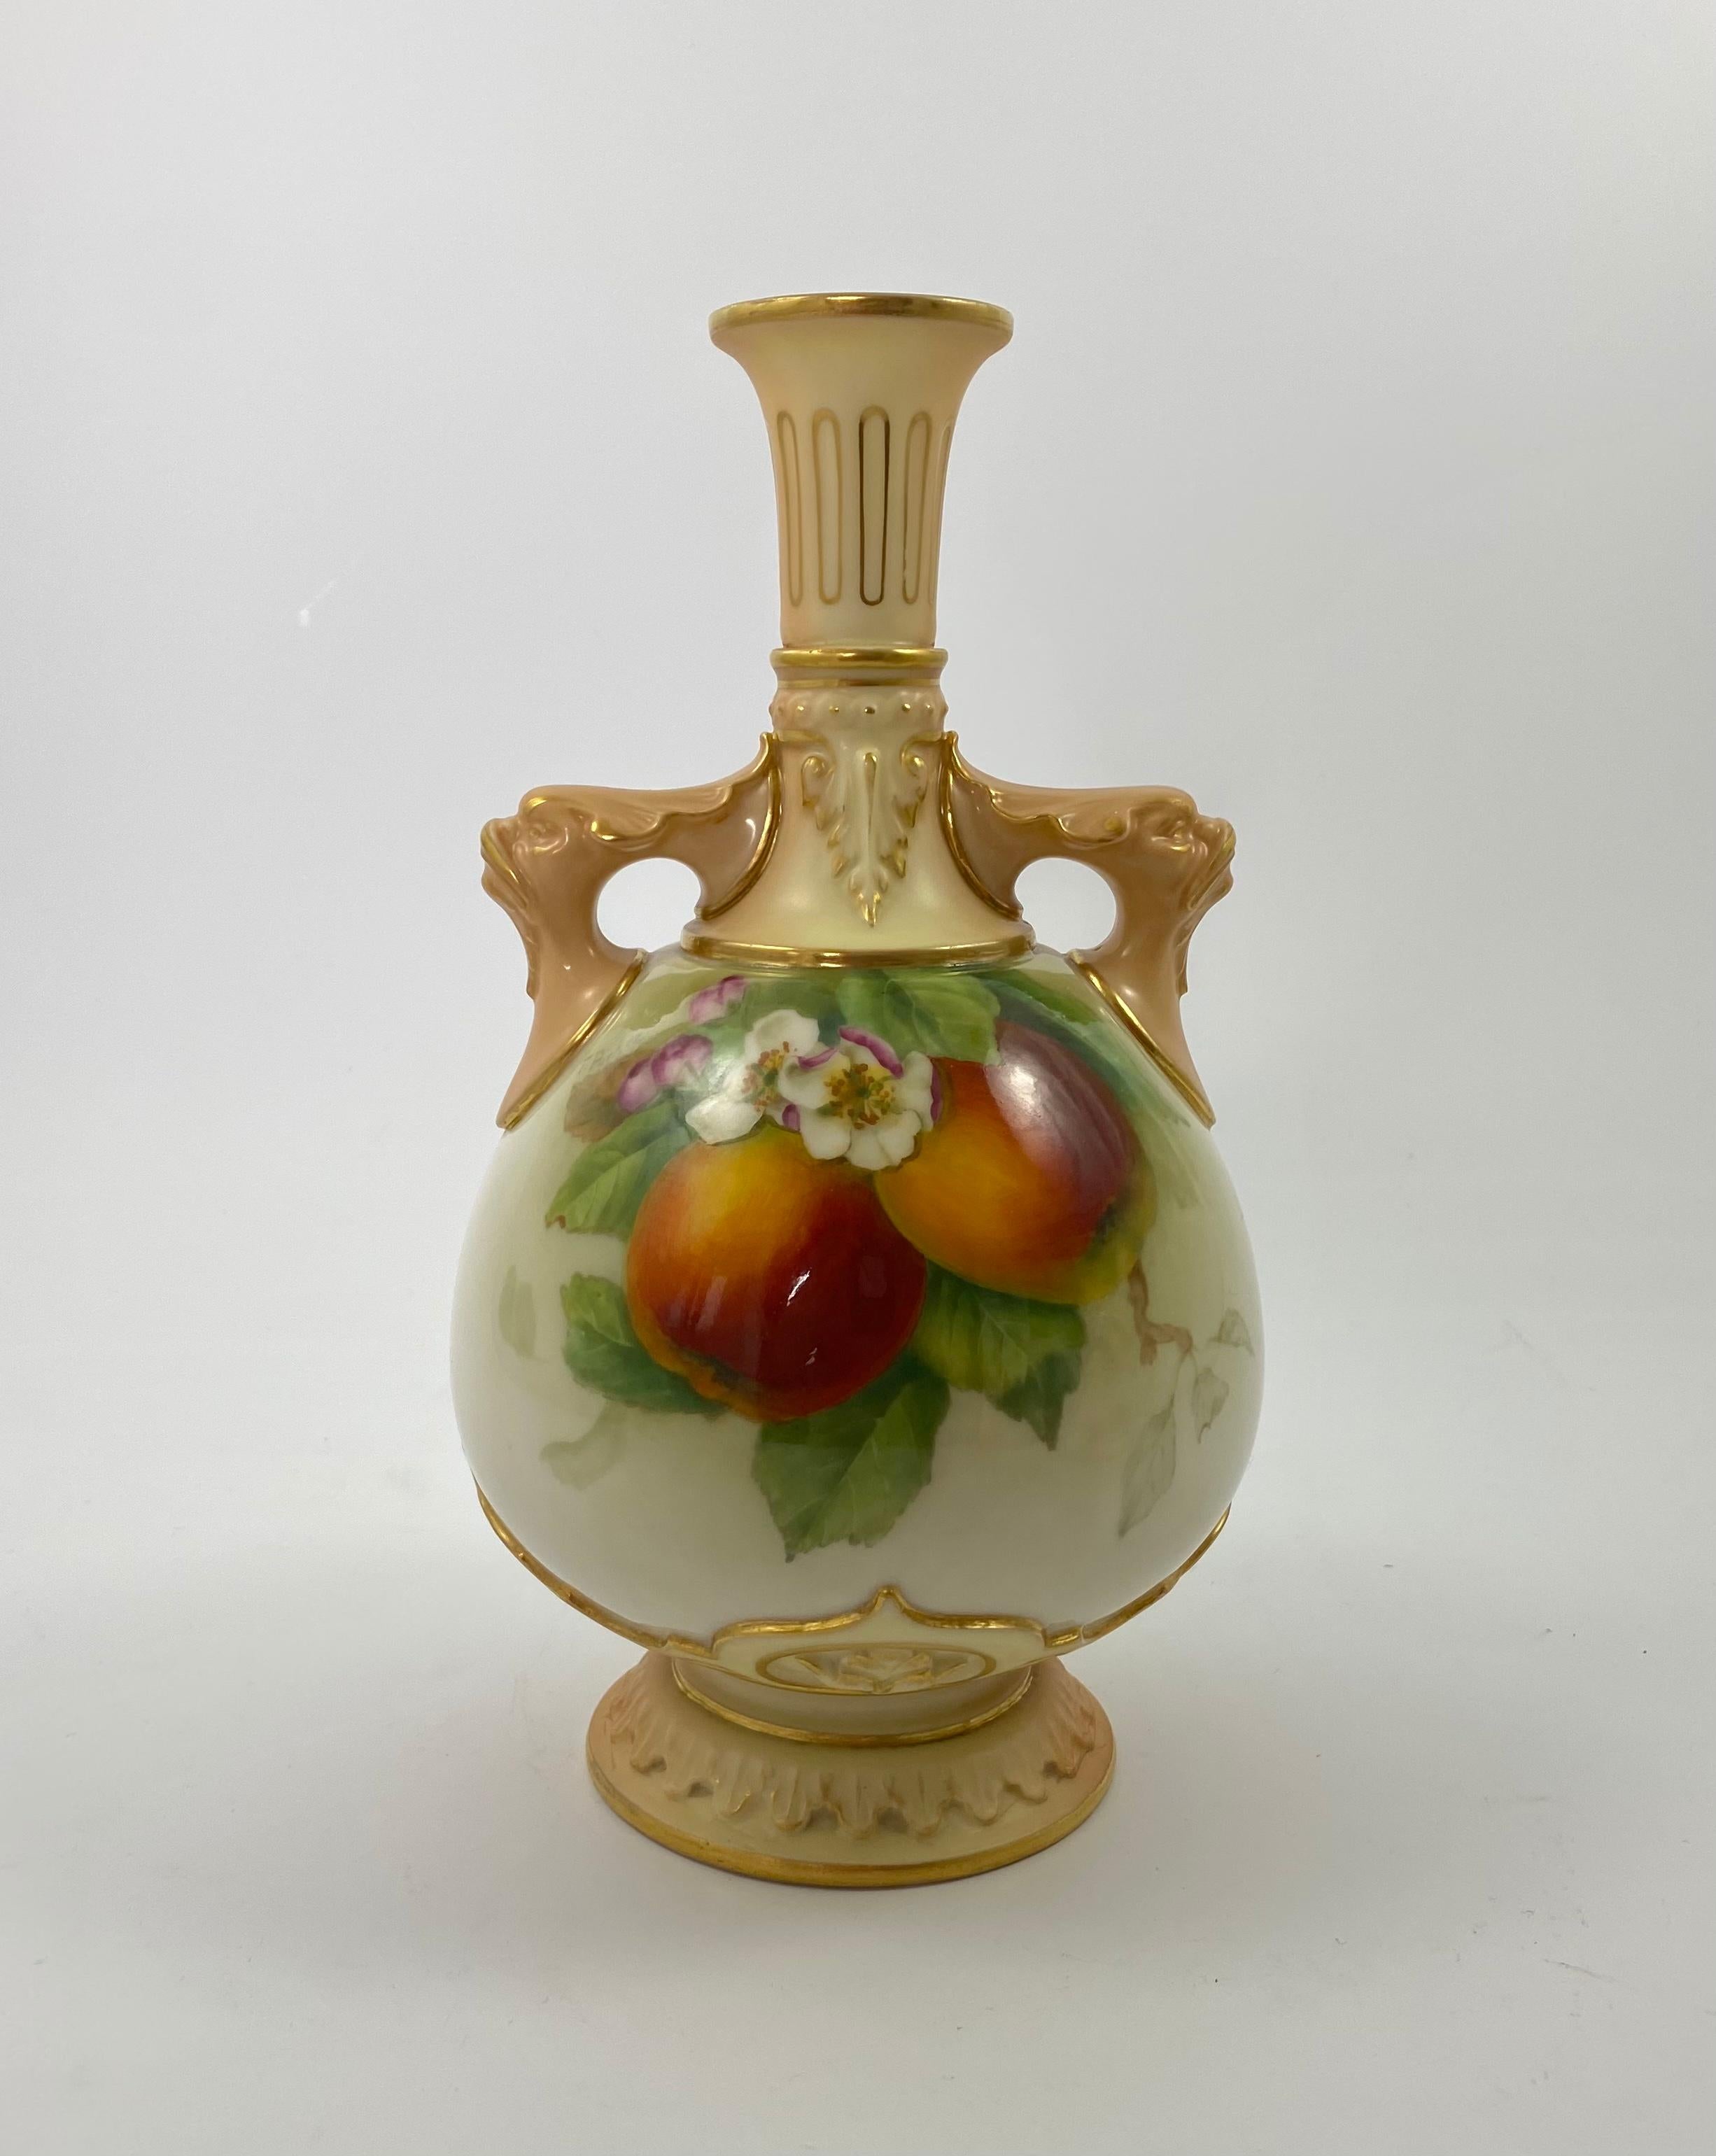 Fine pair of Royal Worcester porcelain vases, painted by F. Parker, dated 1906. The vases painted with studies of apples and pears, with sprigs of blossom to the reverses. Both vases having mythical beast handles, and acanthus leaf moulded necks,